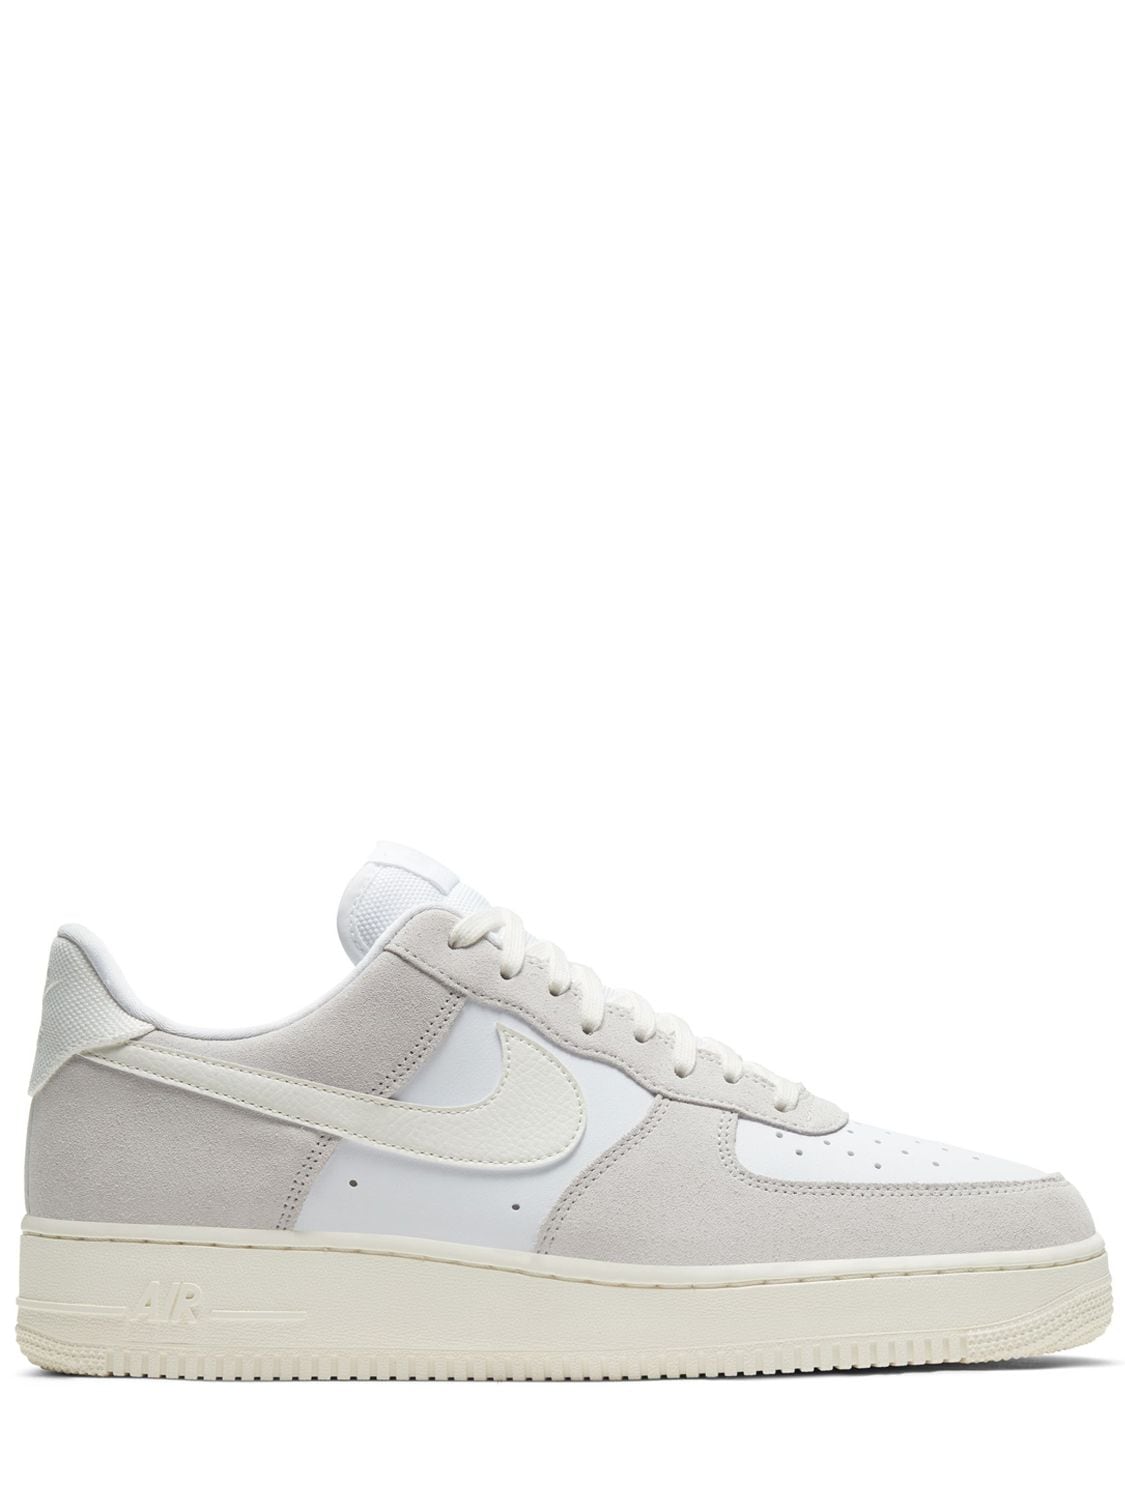 Image of Air Force 1 Lv8 Sneakers